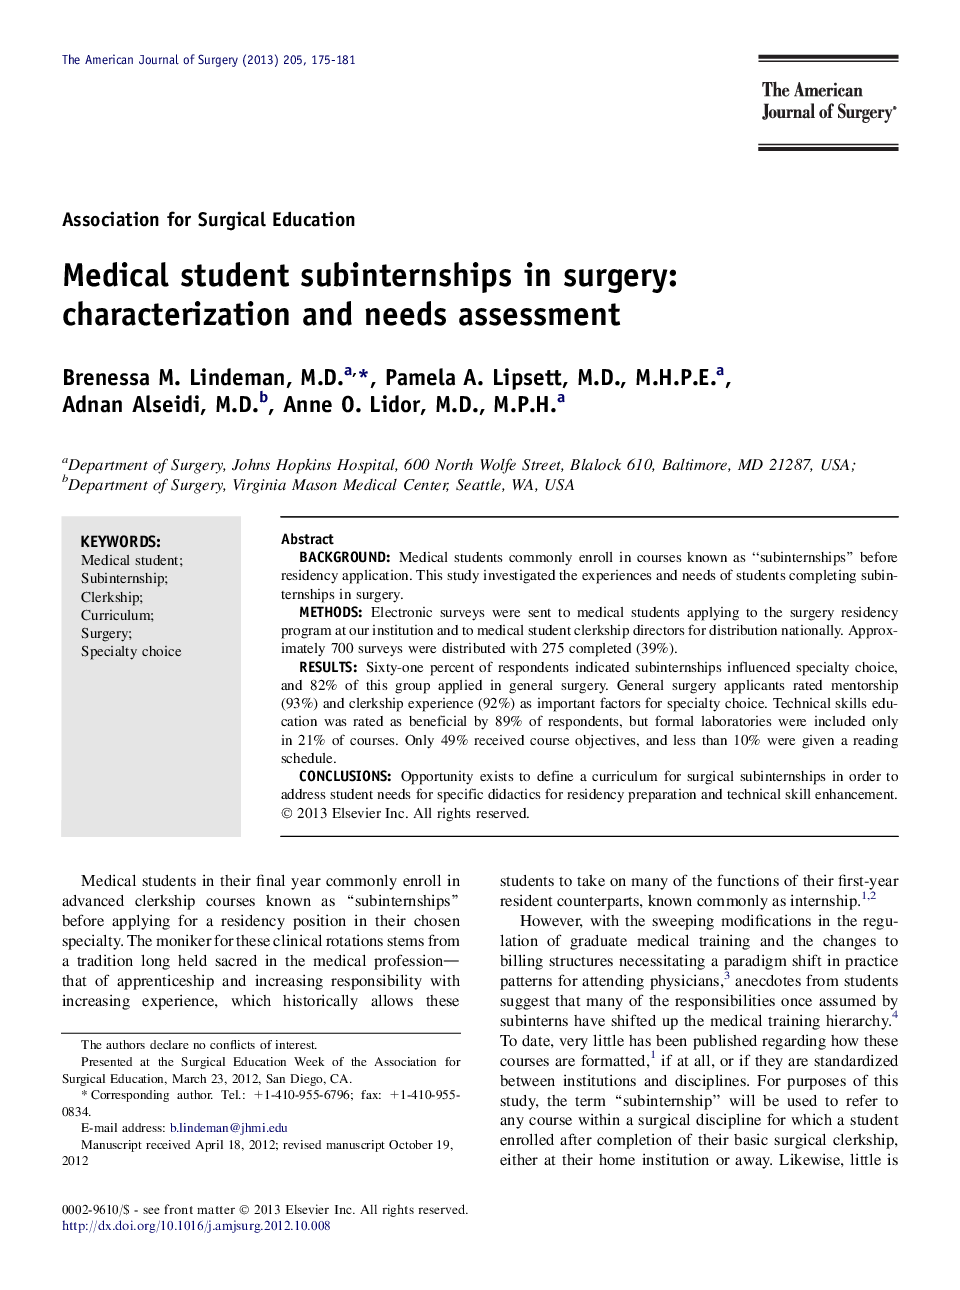 Medical student subinternships in surgery: characterization and needs assessment 